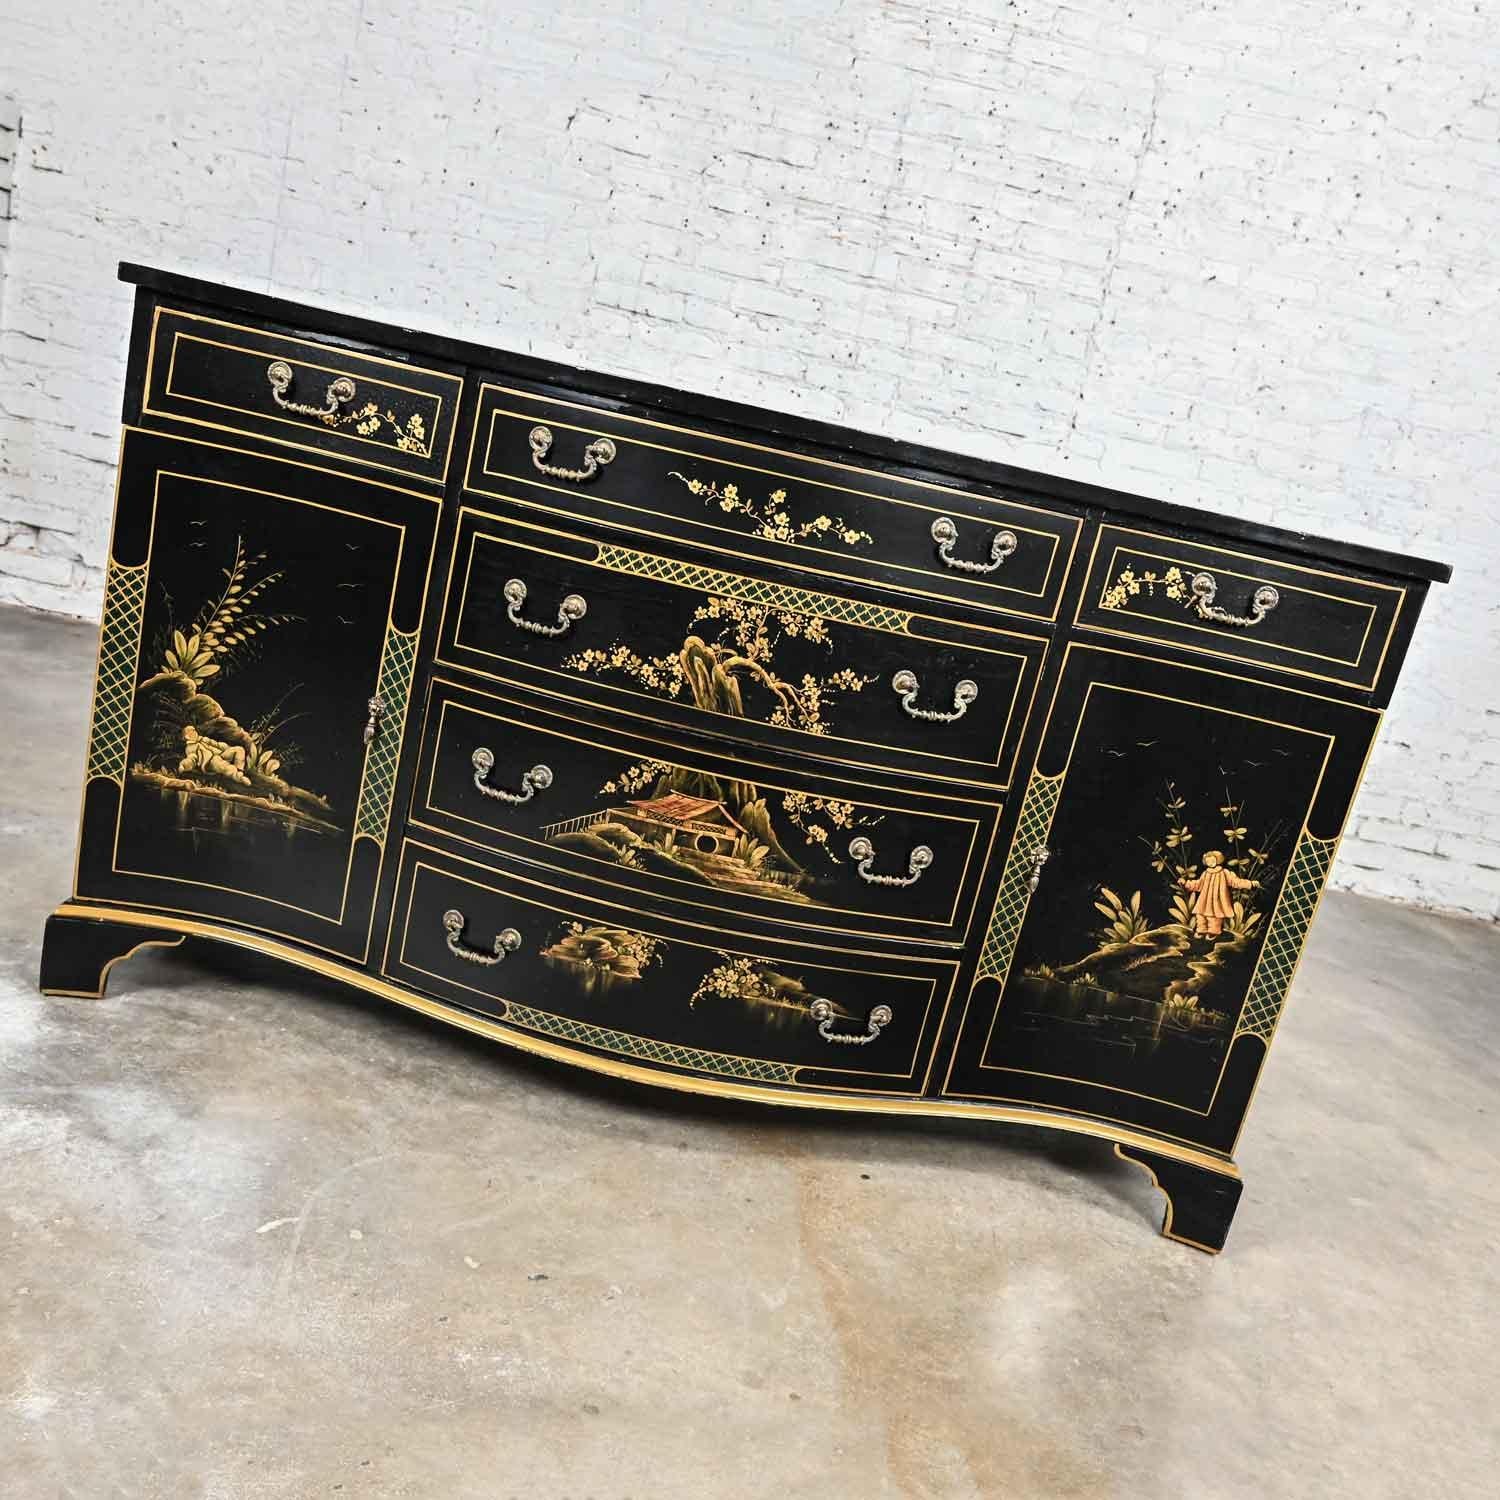 Chinoiserie chinoiserie Regency Style Union National Black & Gilt Buffet Sideboard